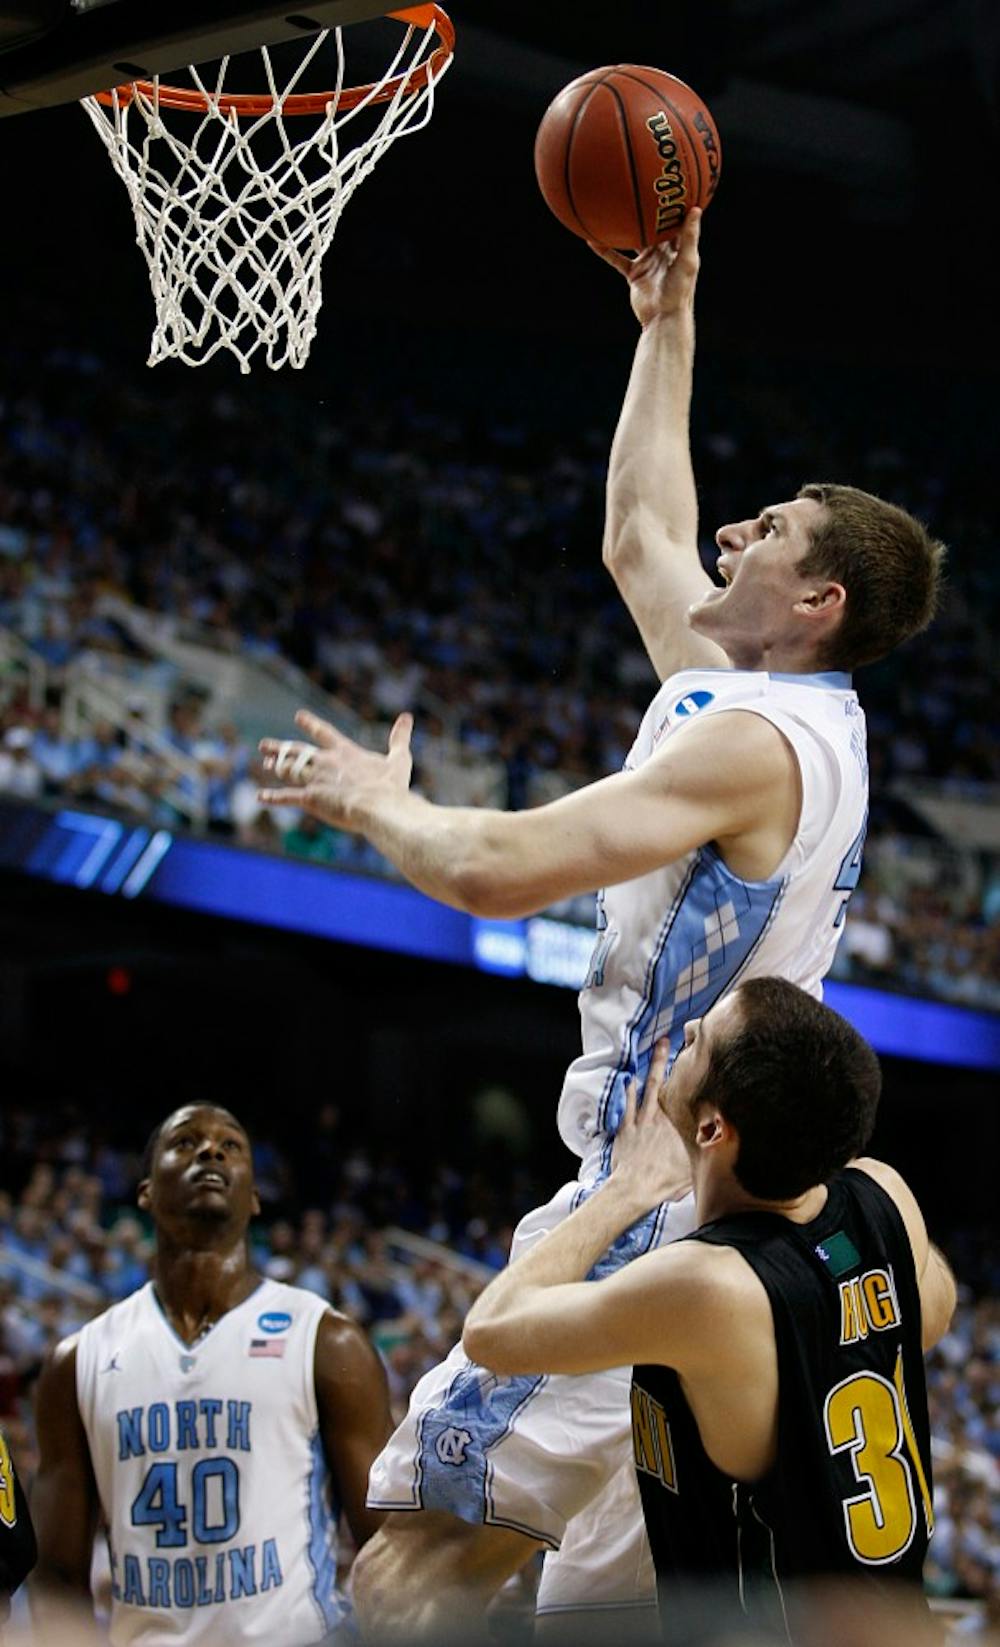 UNC forward Tyler Zeller shoots the ball during the first half in the game against Vermont. Zeller had 17 points in the Tar Heels 77-58 win over Vermont in the second round of the NCAA tournament at the Greensboro Coliseum on Friday, March 16, 2012.